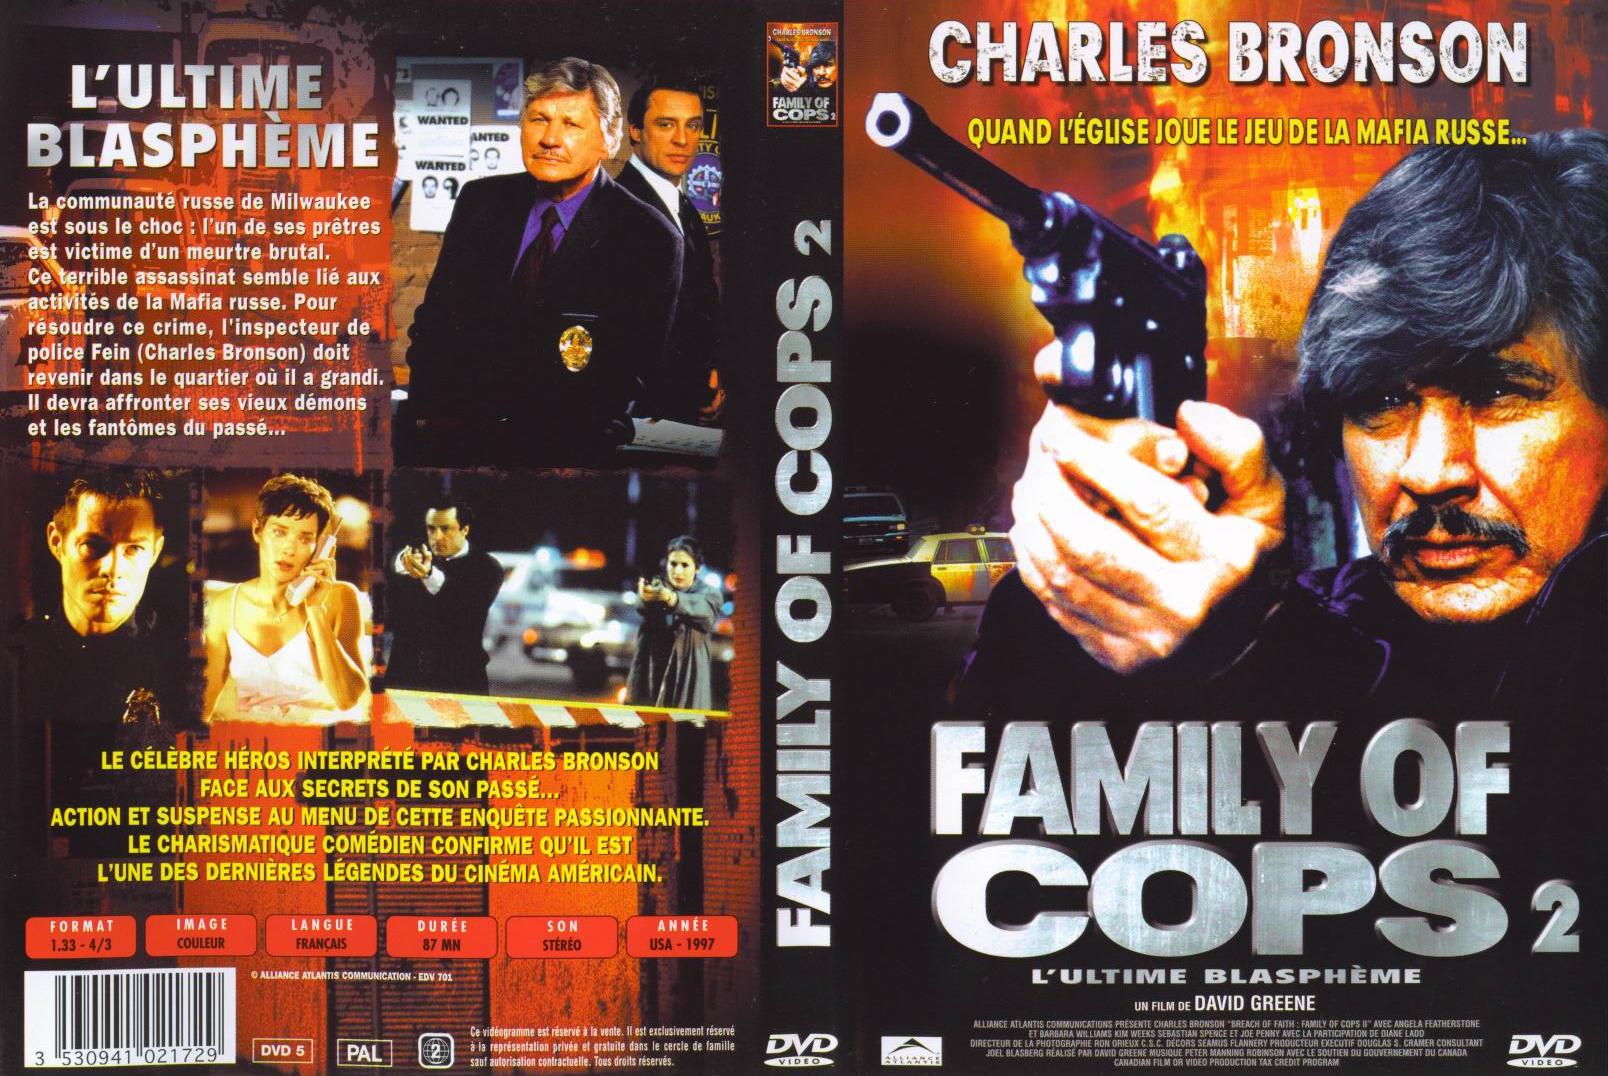 Jaquette DVD Family of cops 2